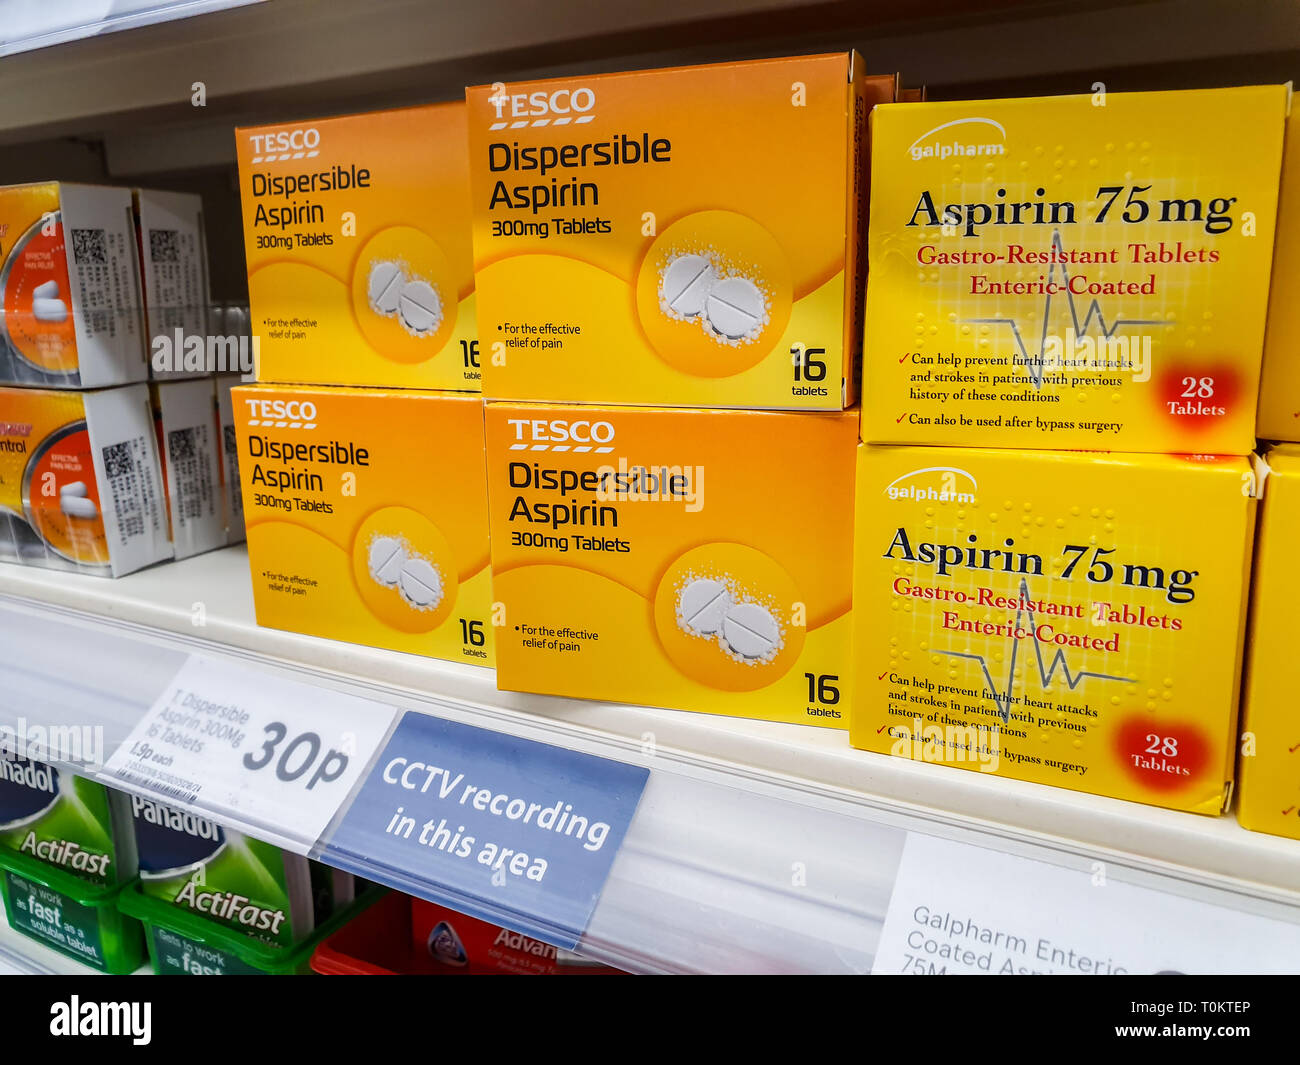 SHEFFIELD, UK - 20TH MARCH 2019: Tesco own brand Dispersible asprin tablets Stock Photo